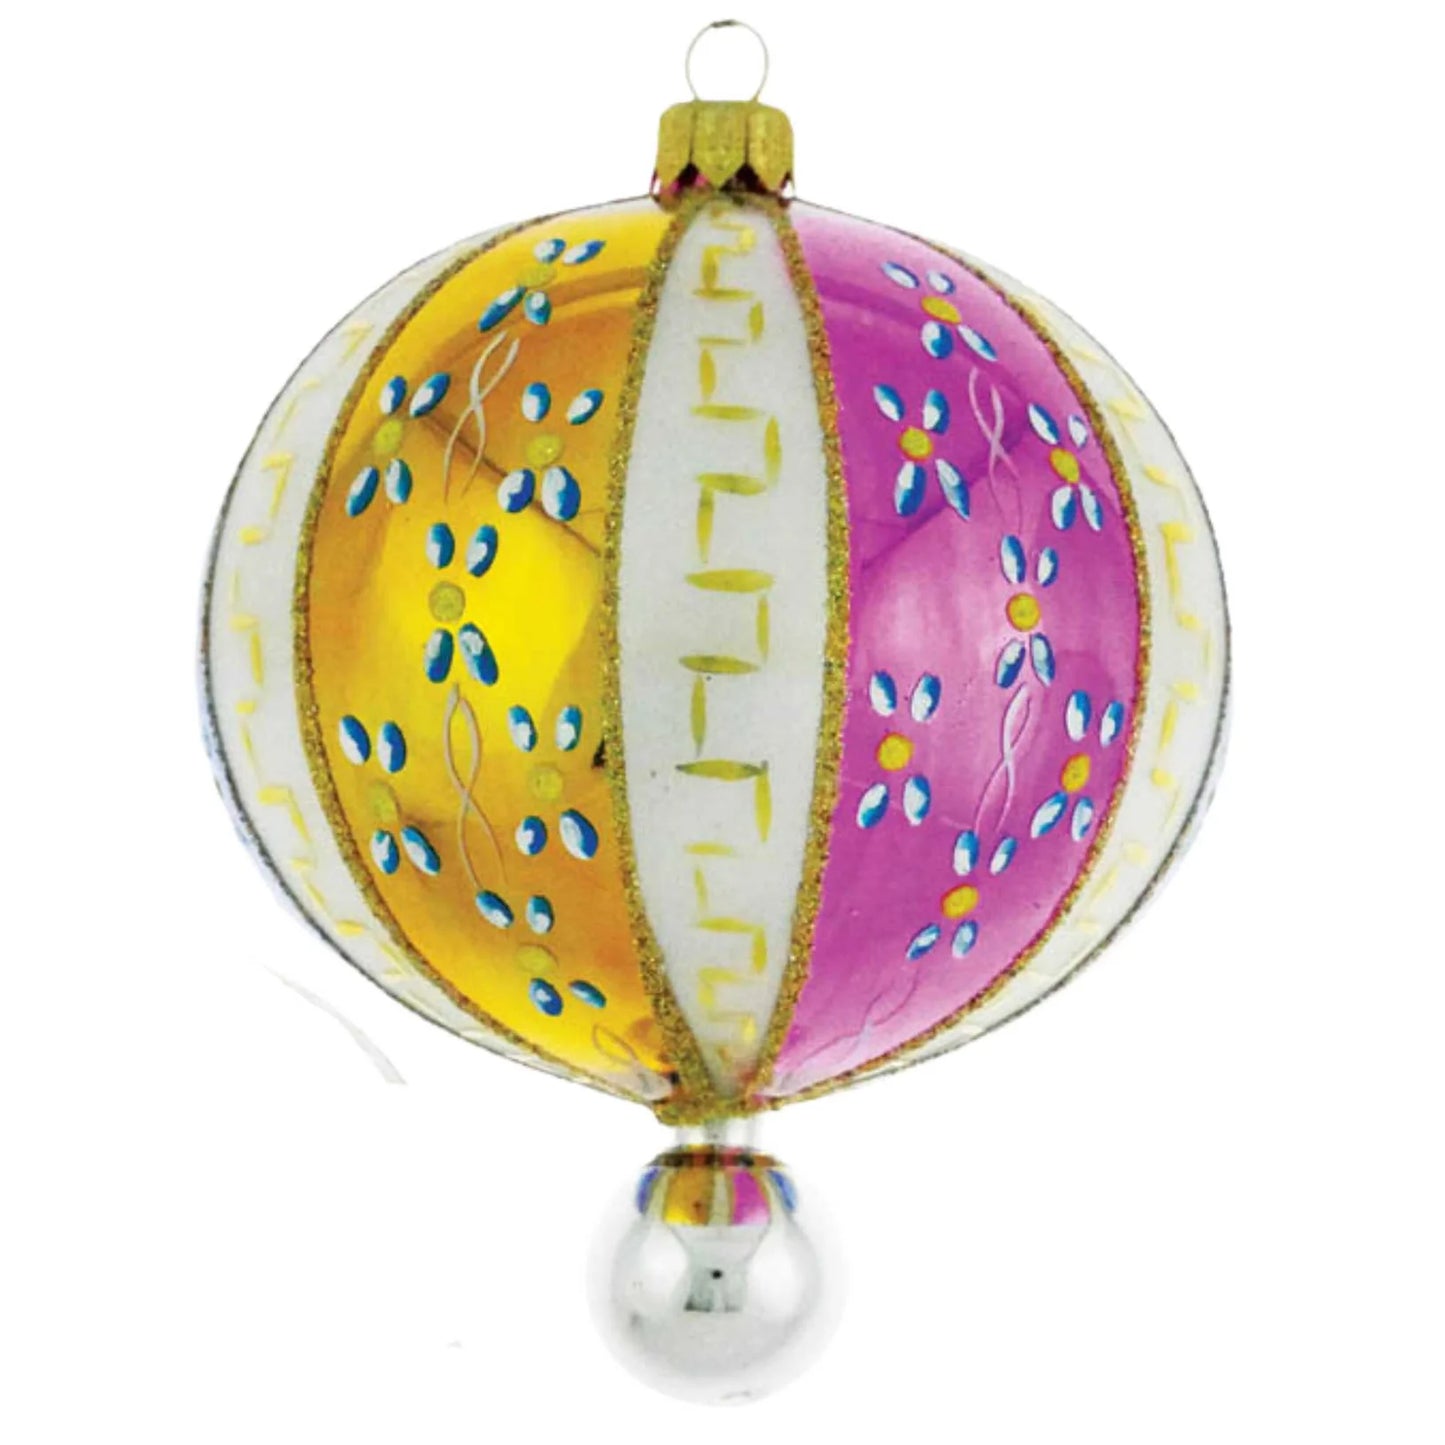 Heartfully Yours Franciscan Christmas ball ornament Christopher Radko 